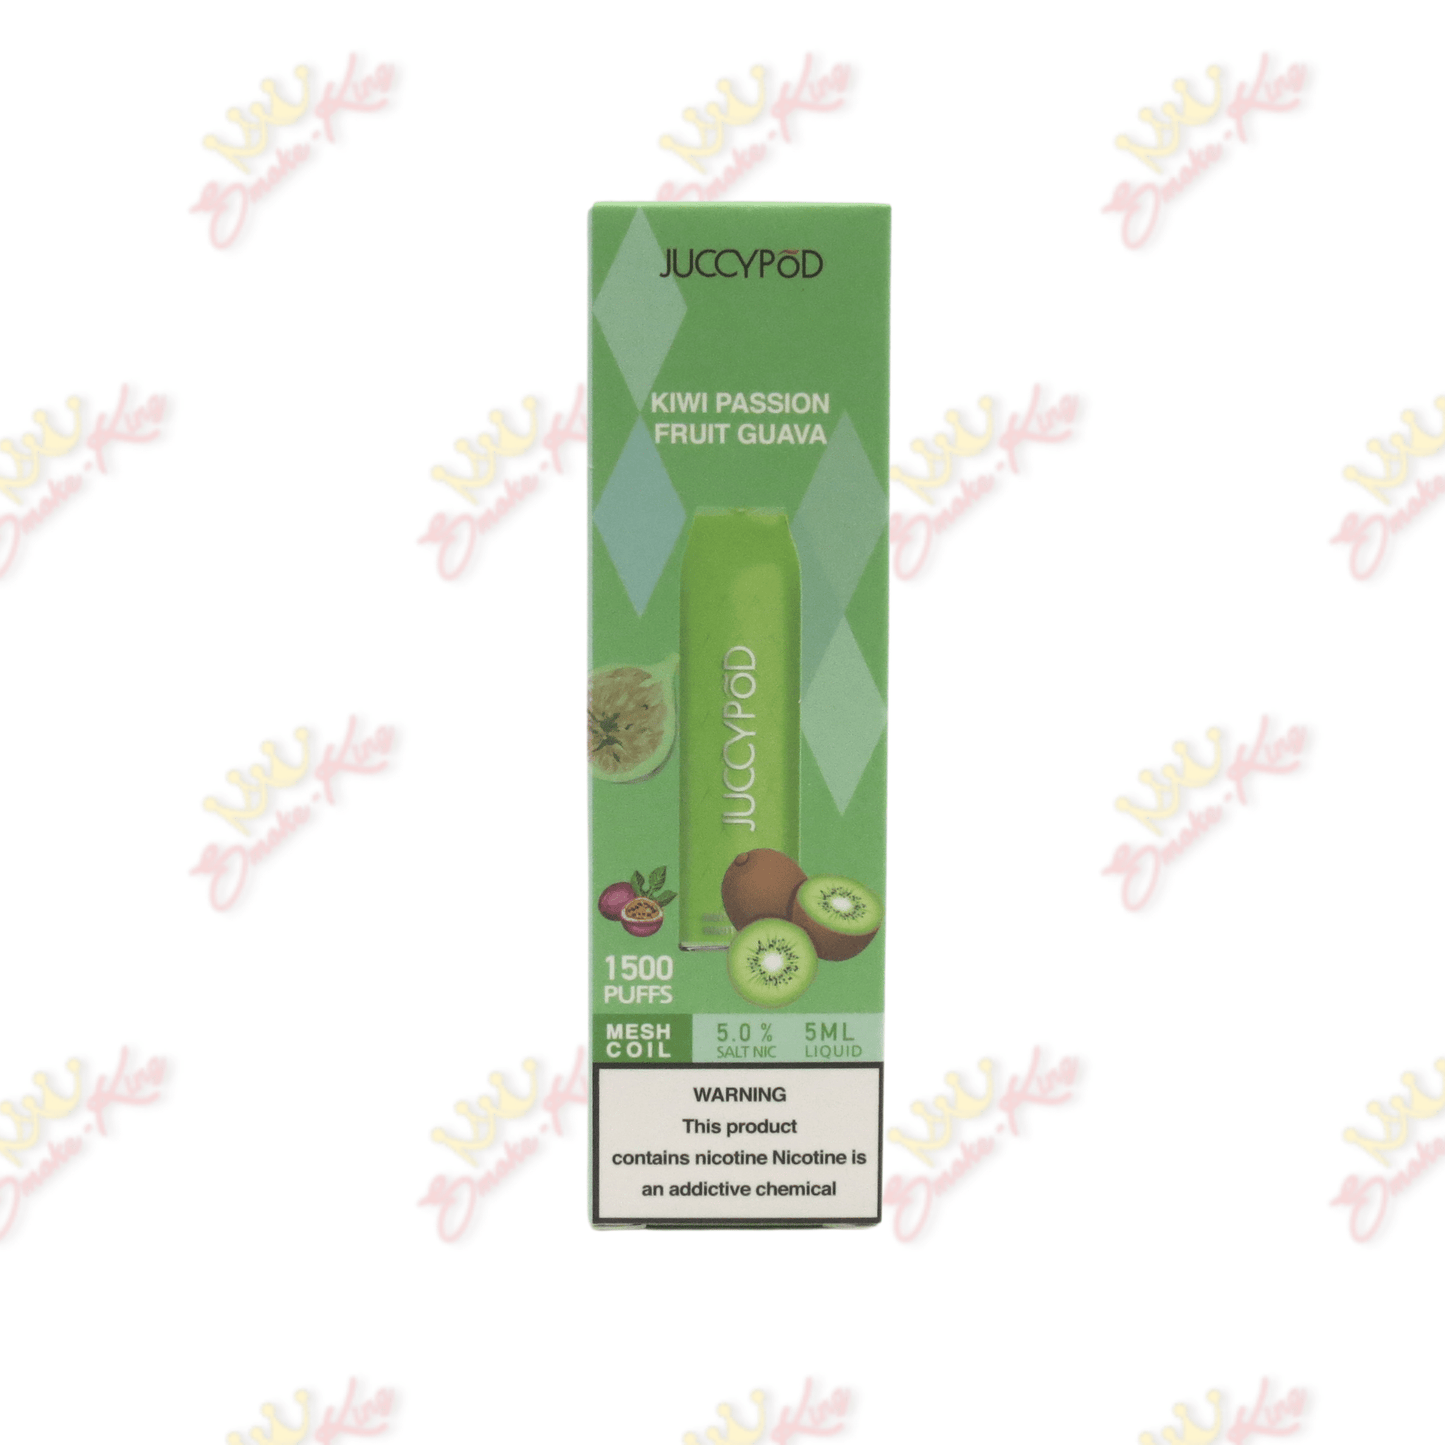 Juicy Pods Disposable Vapes Kiwi Passion Fruit Guava / One for $11.99 Juicy Pod (1500 puffs)